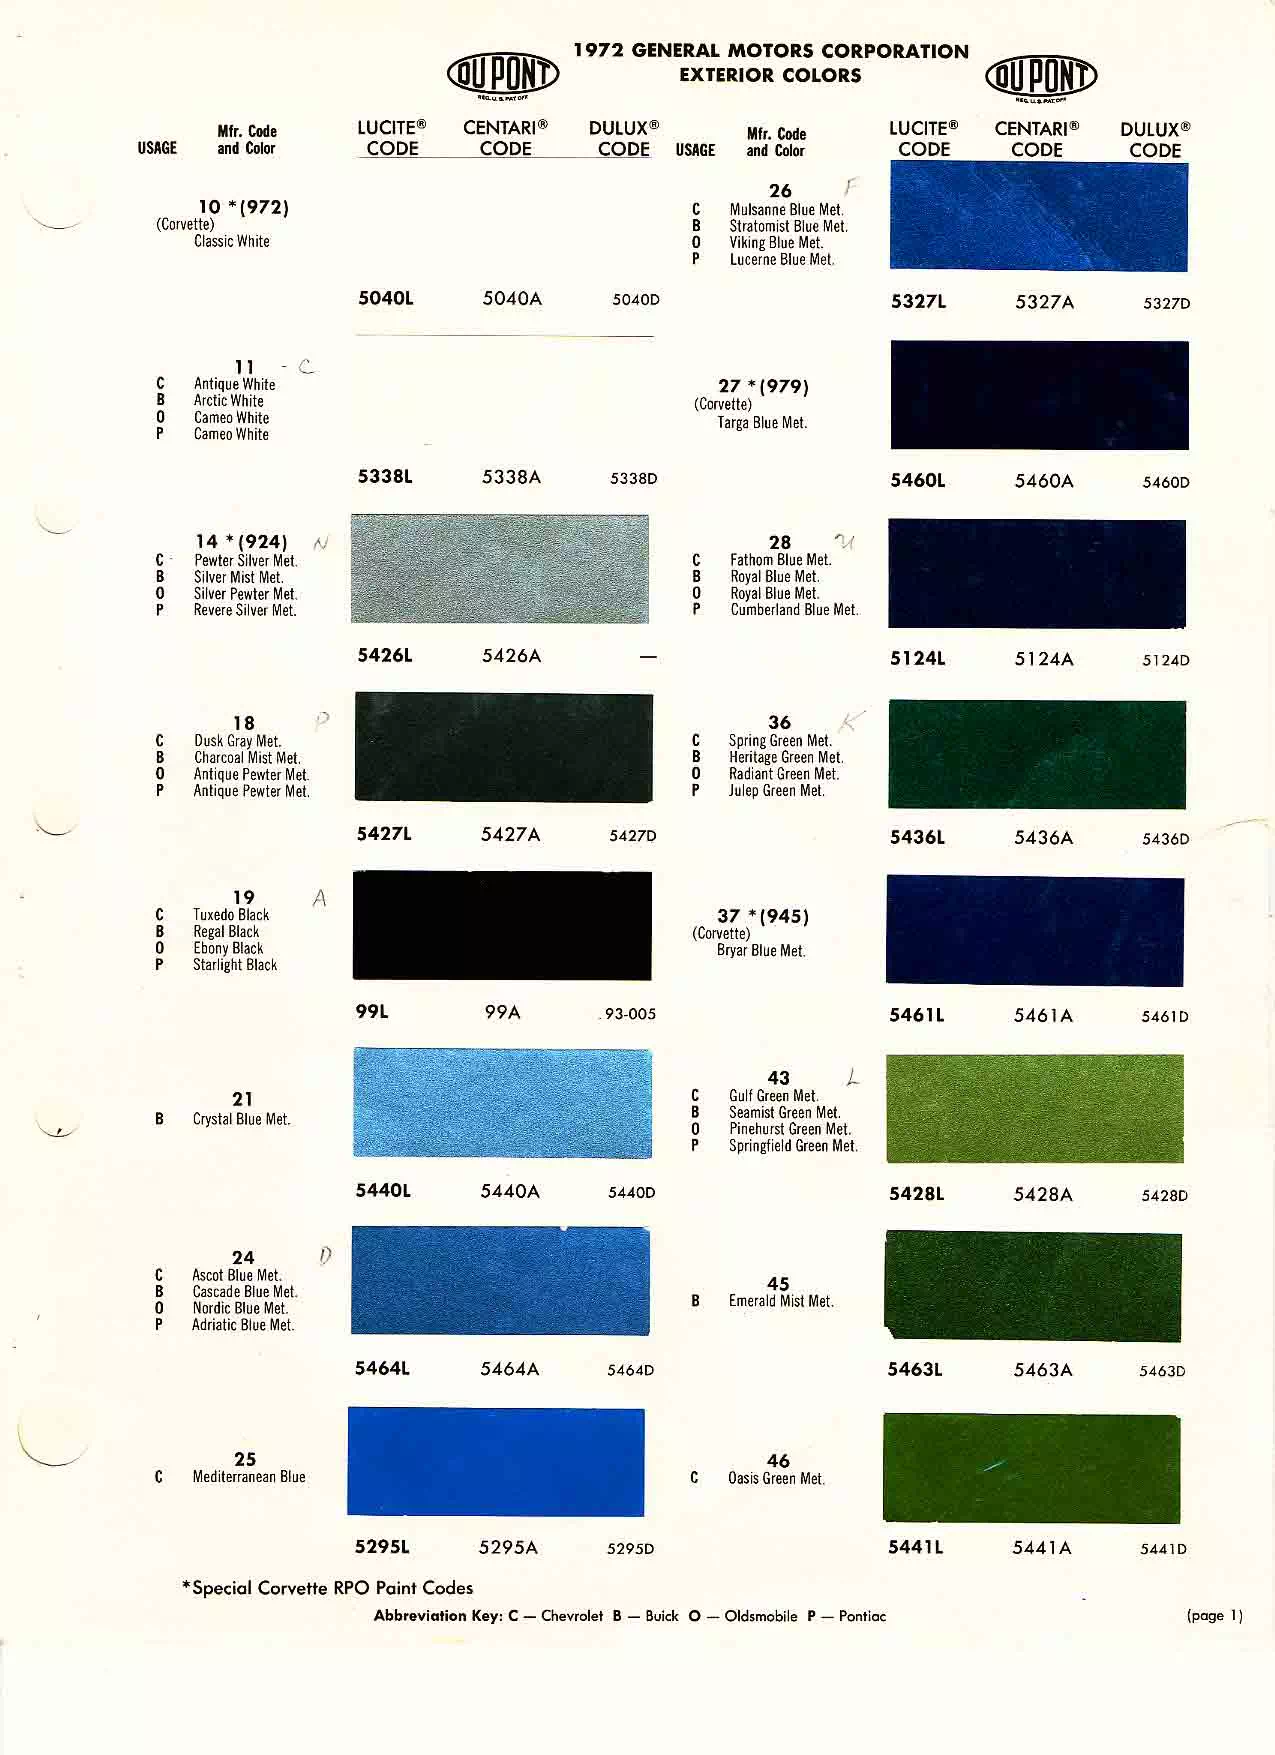 Colors, Descriptions, Codes, and Paint Swatches for General Motors Vehicles in 1972